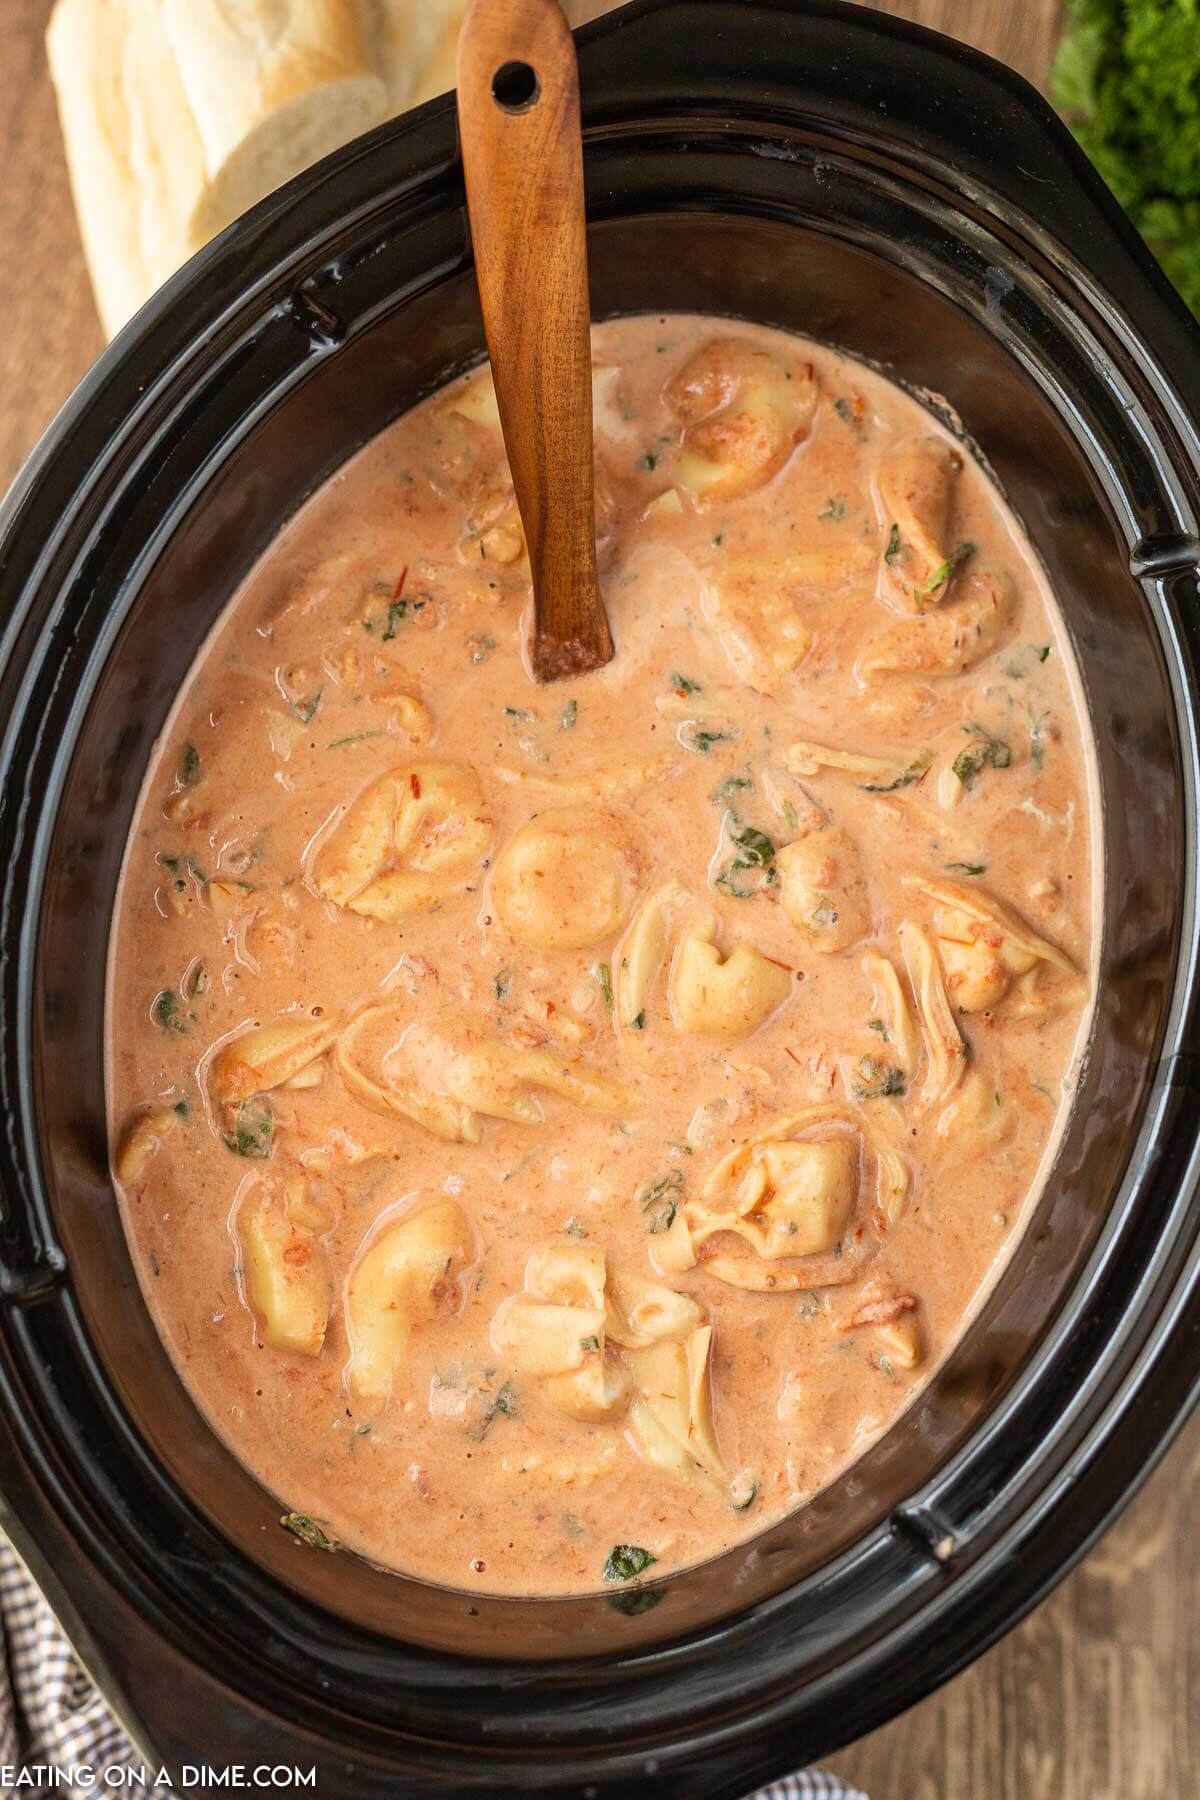 Crockpot with spinach tortellini soup with a wooden spoon